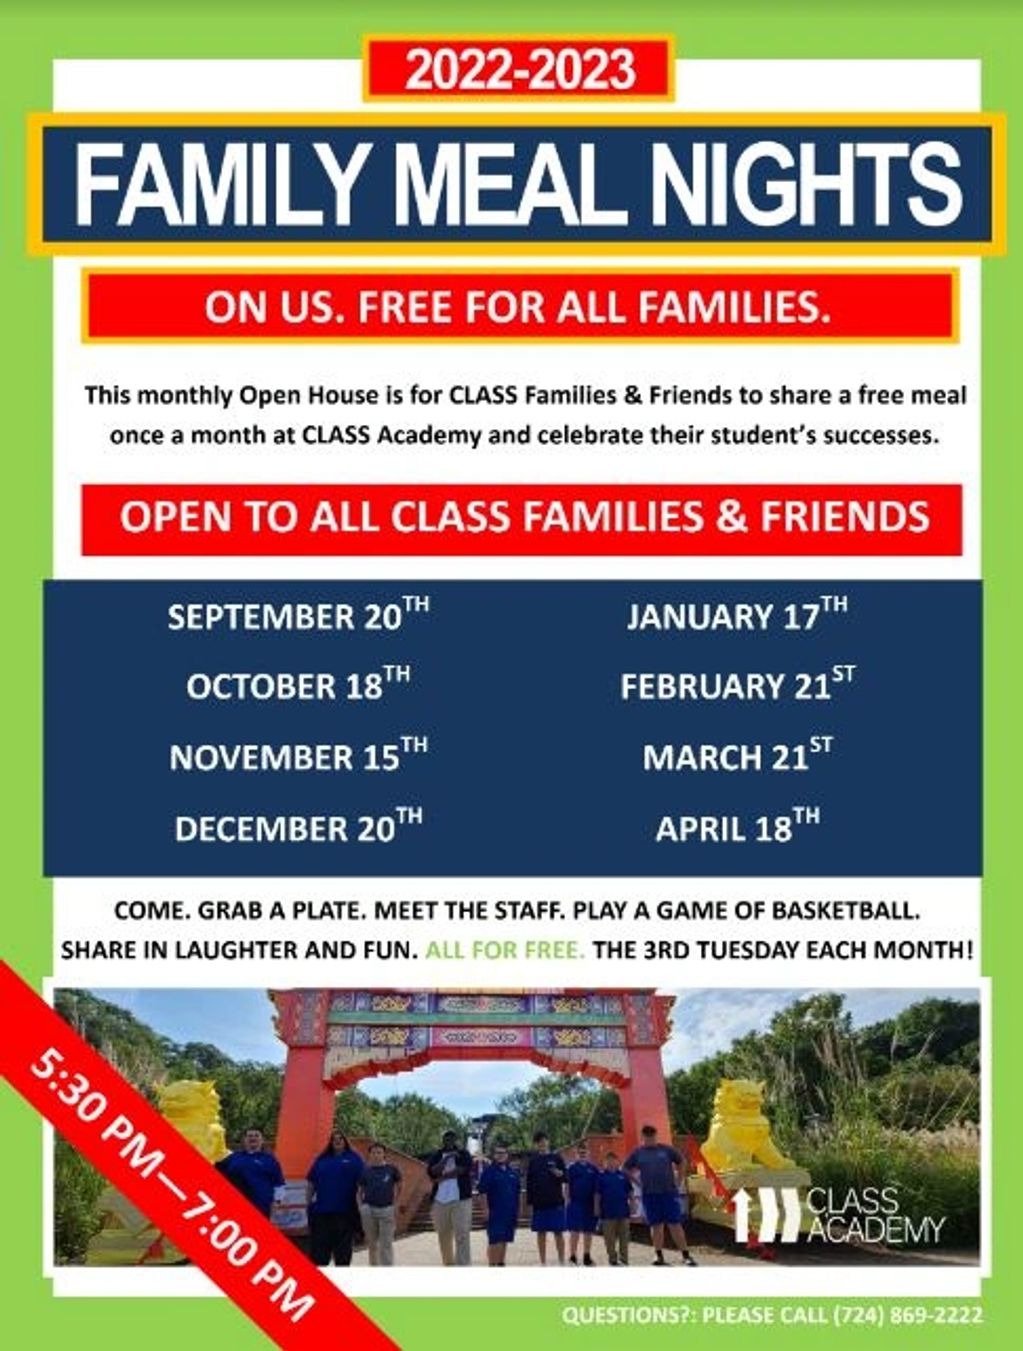 Join us on March 21st for our next Family Meal Night!